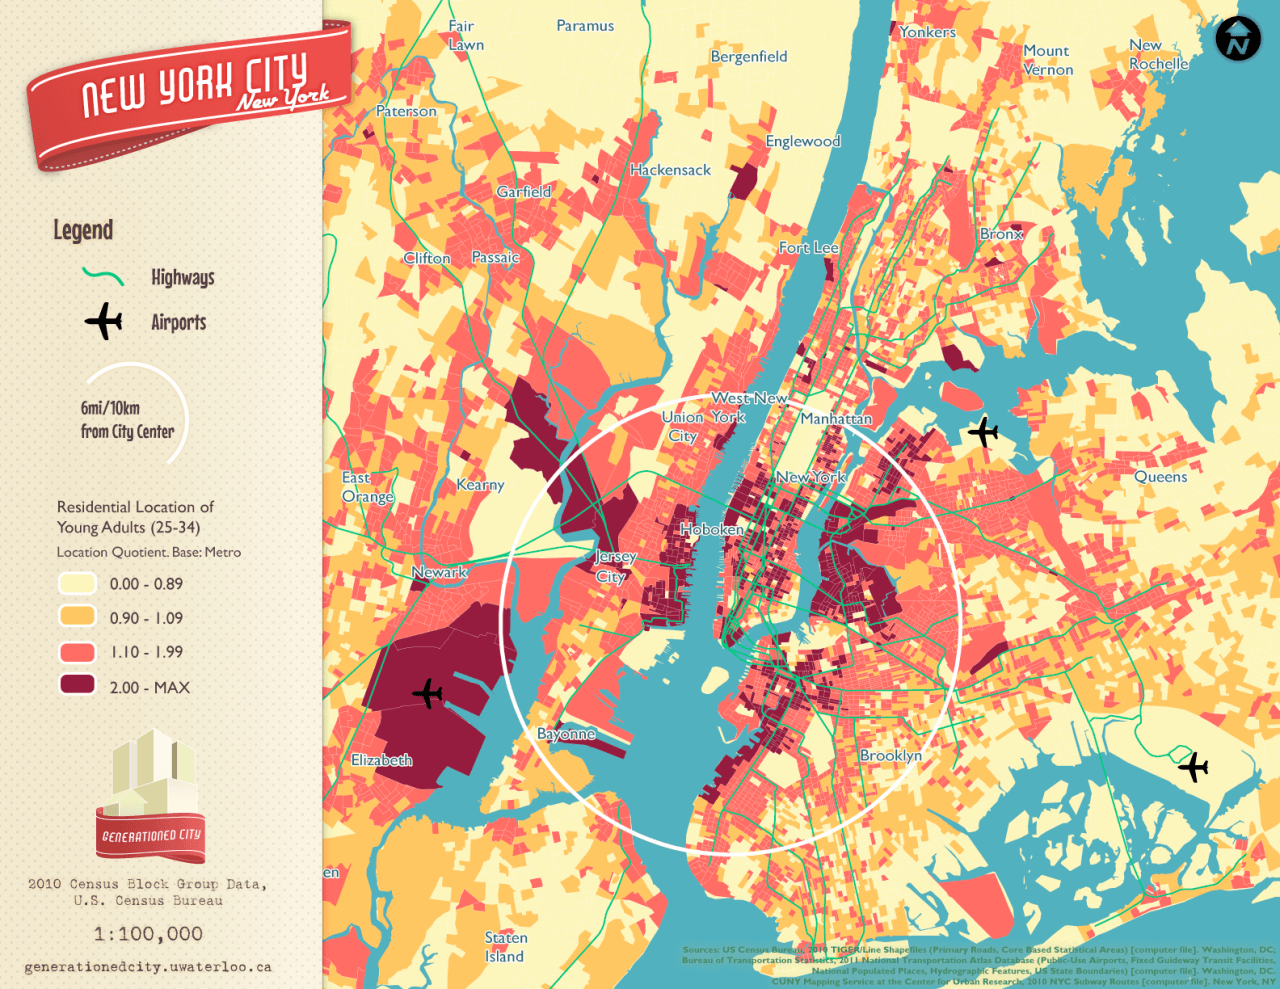 Residential location of young adults in New York.